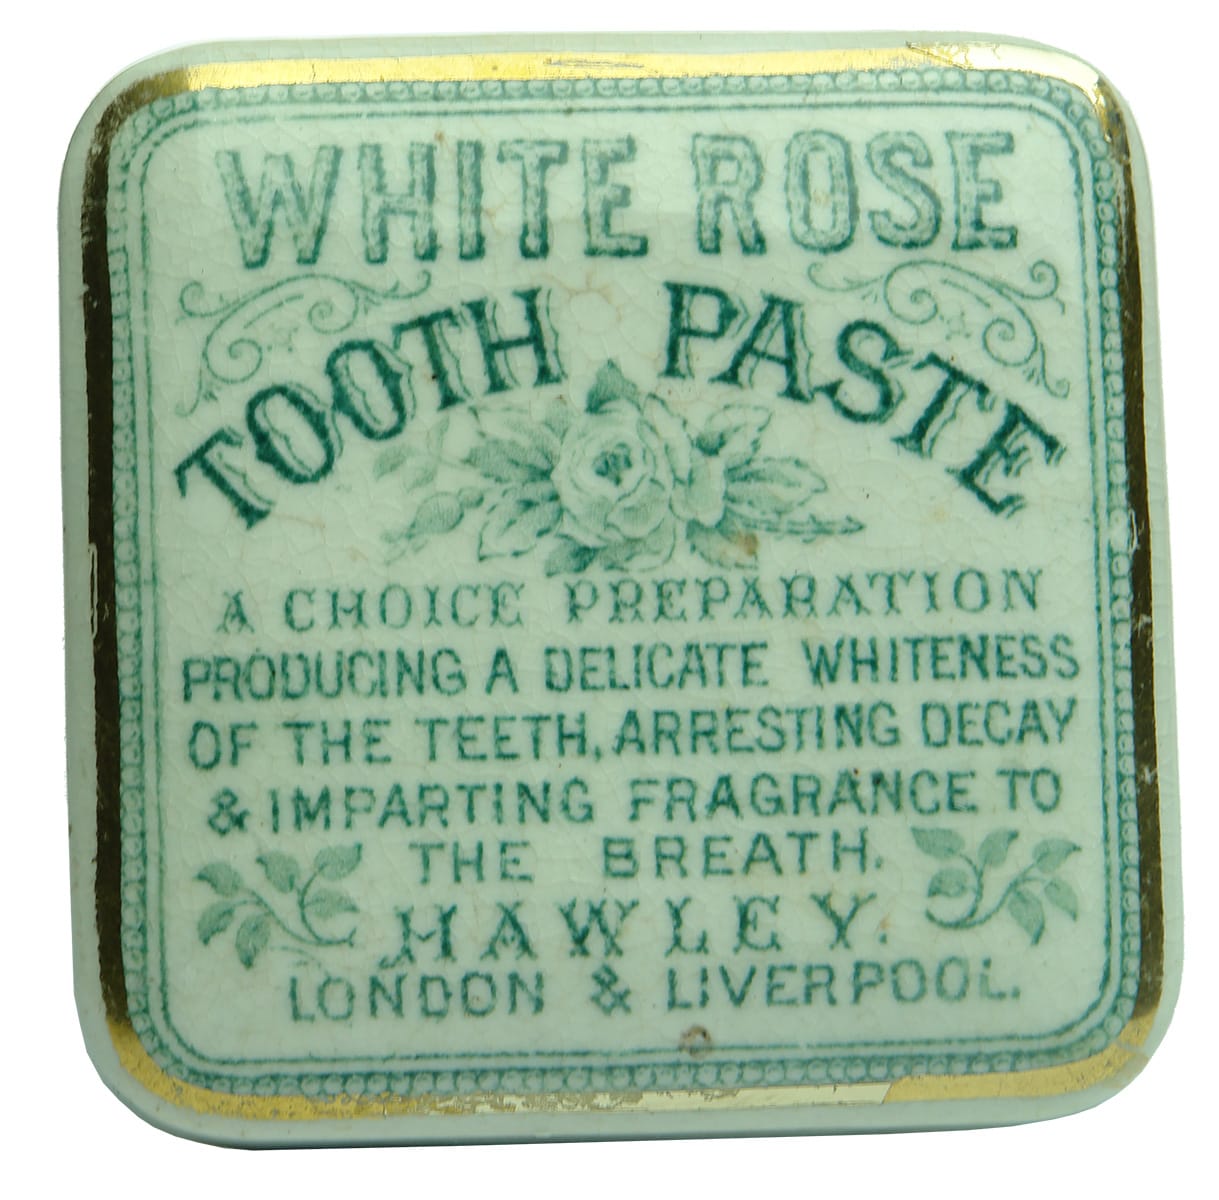 Hawley Liverpool White Rose Tooth Paste Pot Lid